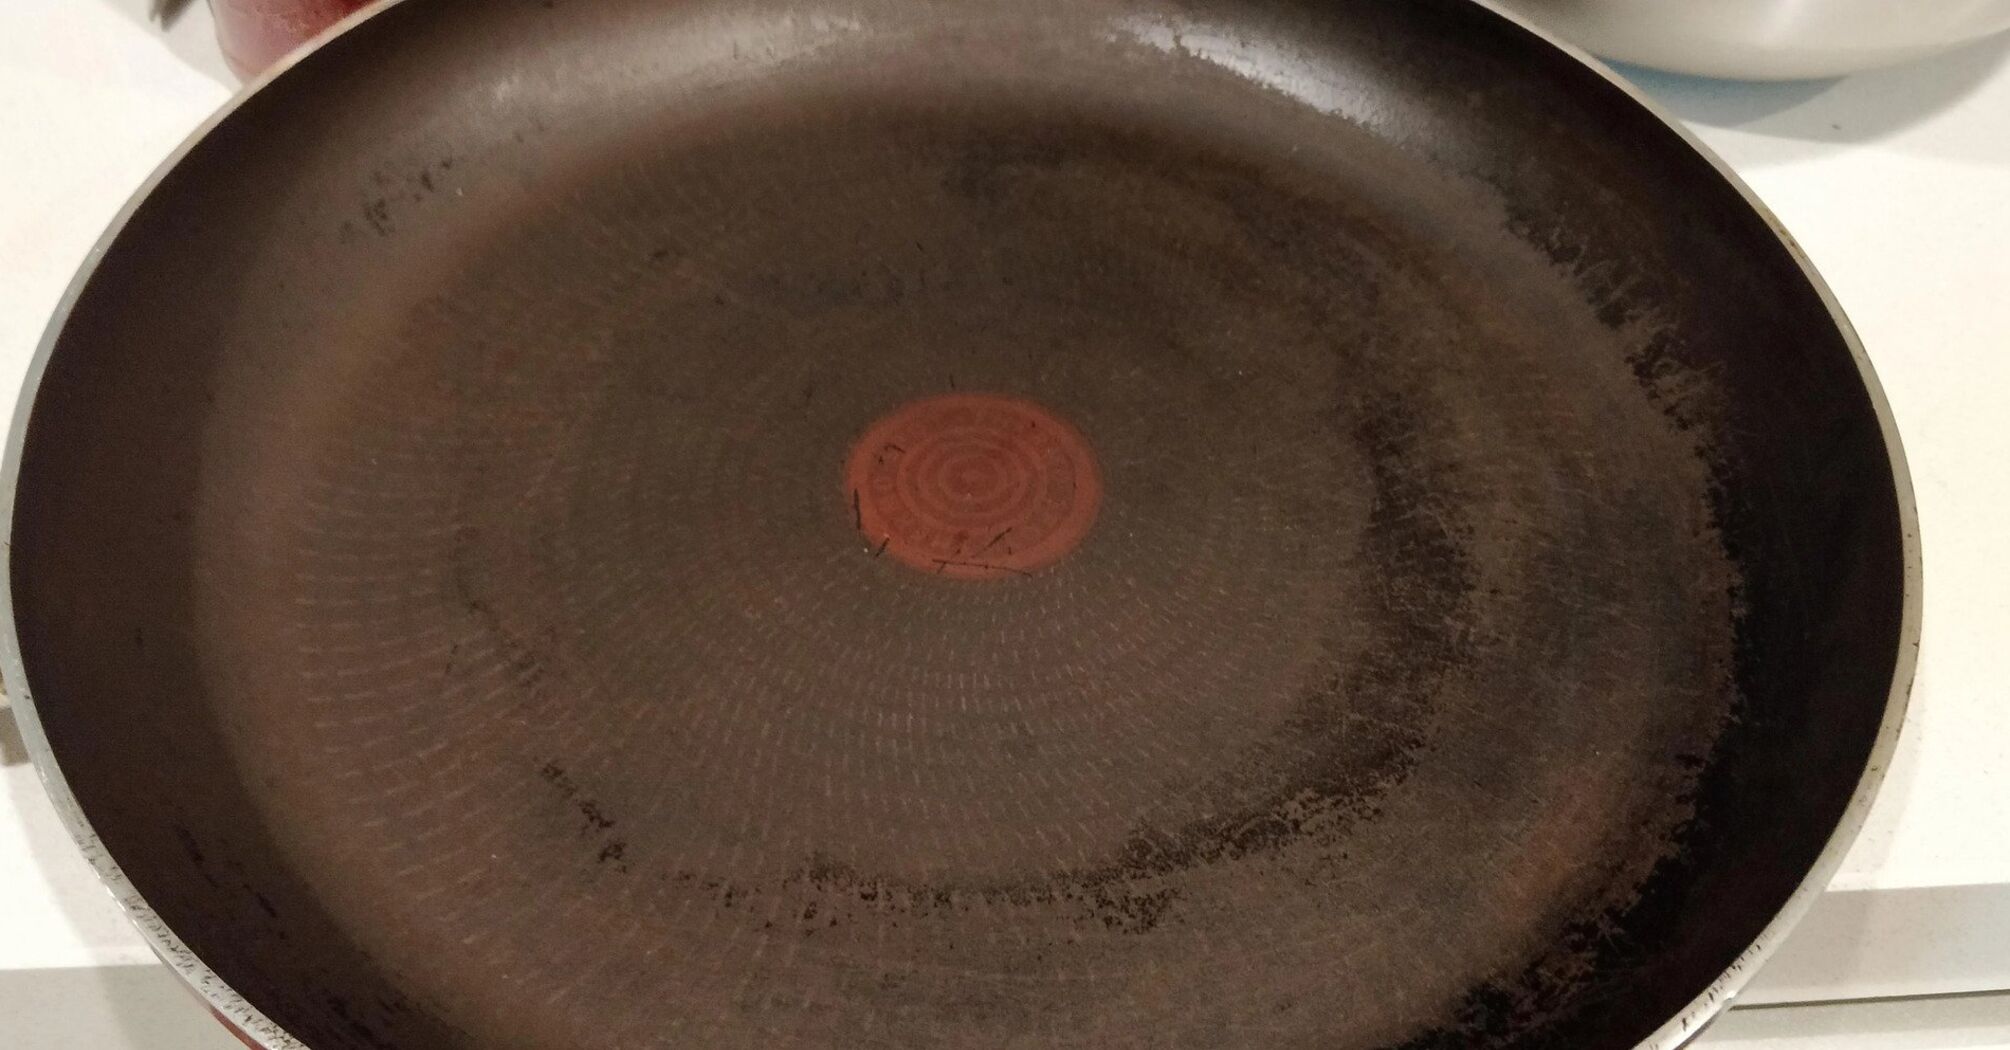 How to restore non-stick coating in a frying pan